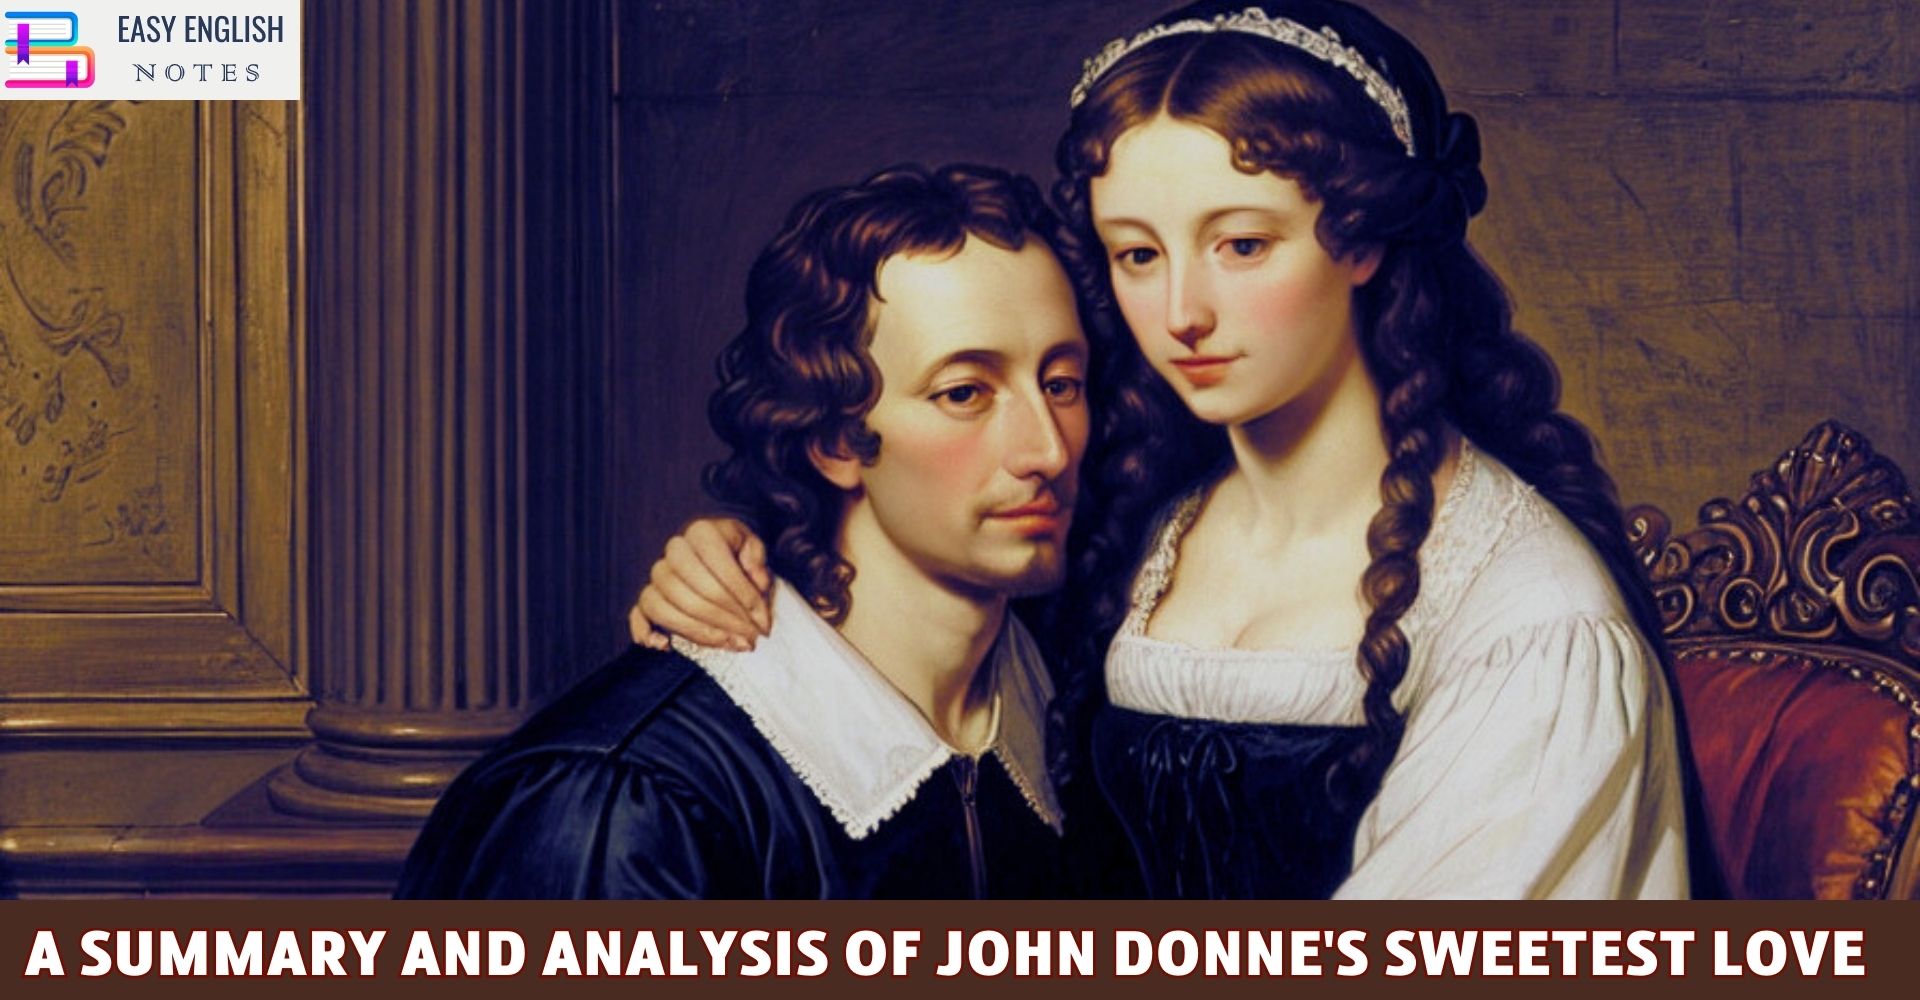 A Summary and Analysis of John Donne's Sweetest Love